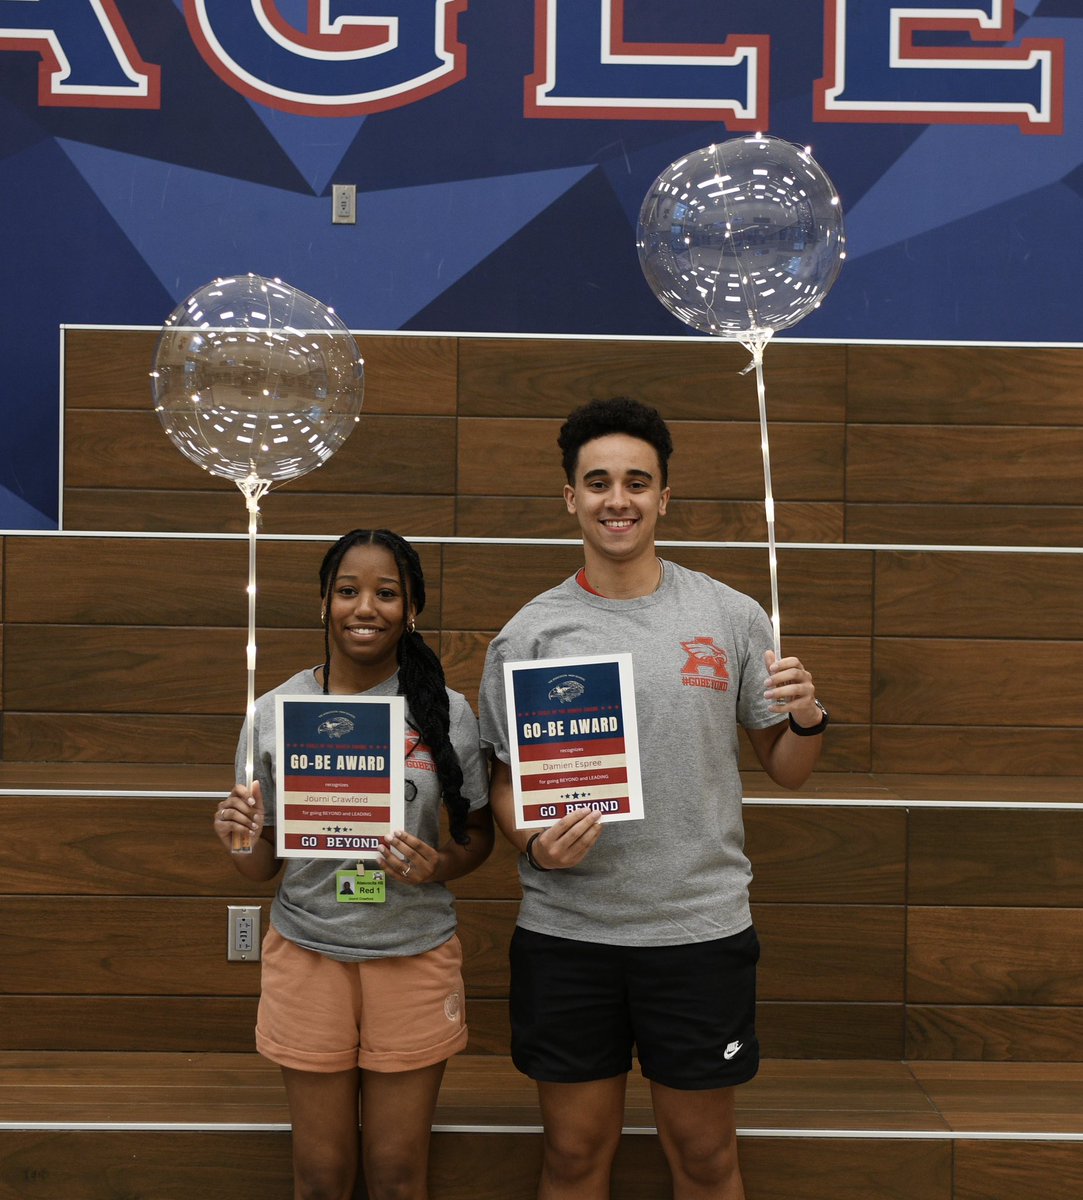 Congrats to our amazing students who were nominated and selected for the Go Beyond (GoBe) awards. February GoBe Kindness Award Winners; Josiah White and Macy Brown. March GoBe A Leader Award Winners; Journi Crawford and Damien Espree @HumbleISD @J_Renaissance #GoBeyond